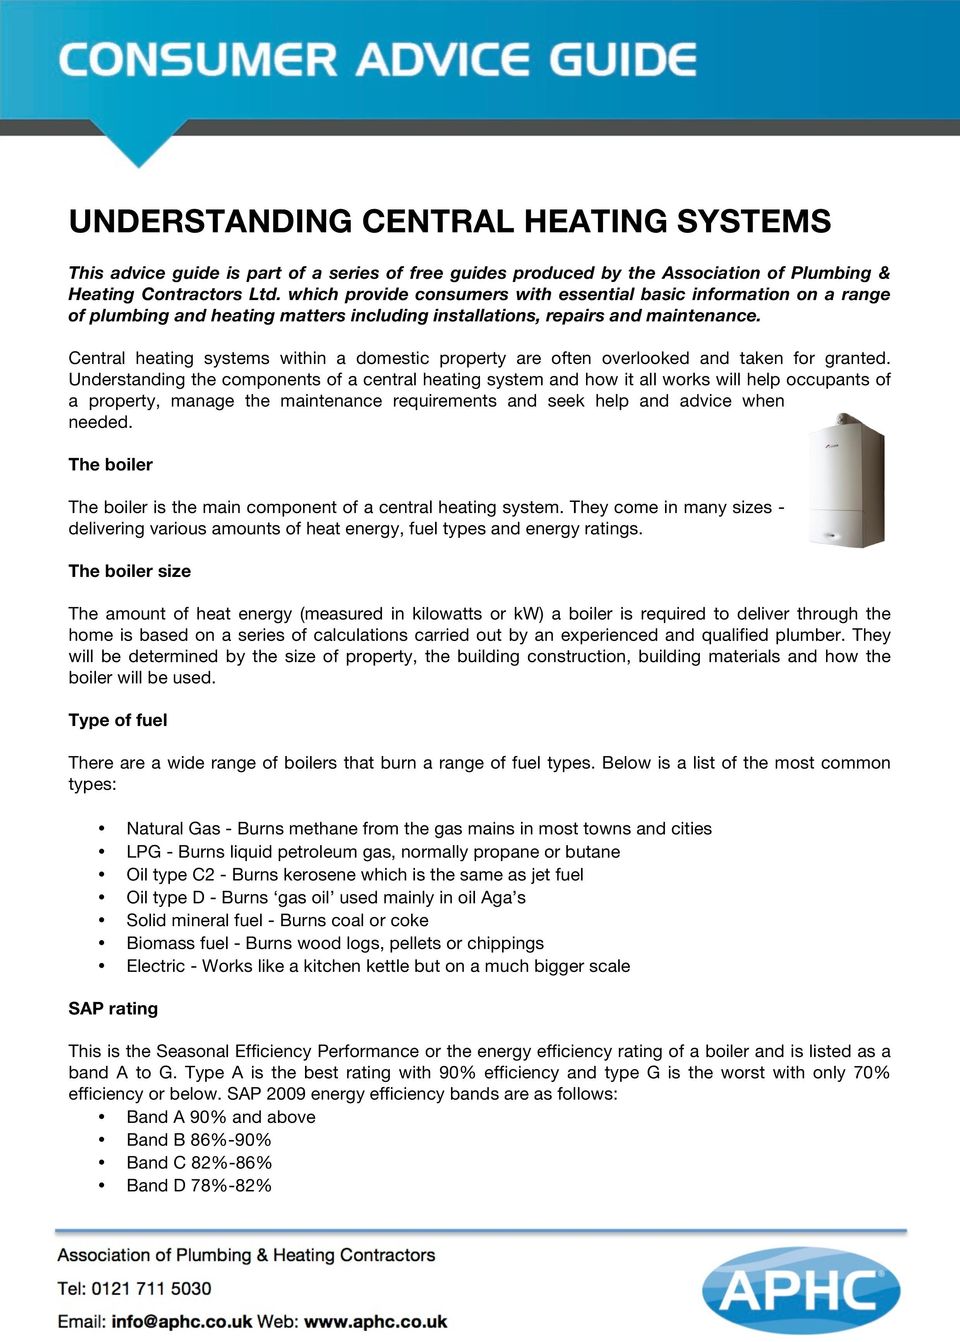 Central heating systems within a domestic property are often overlooked and taken for granted.